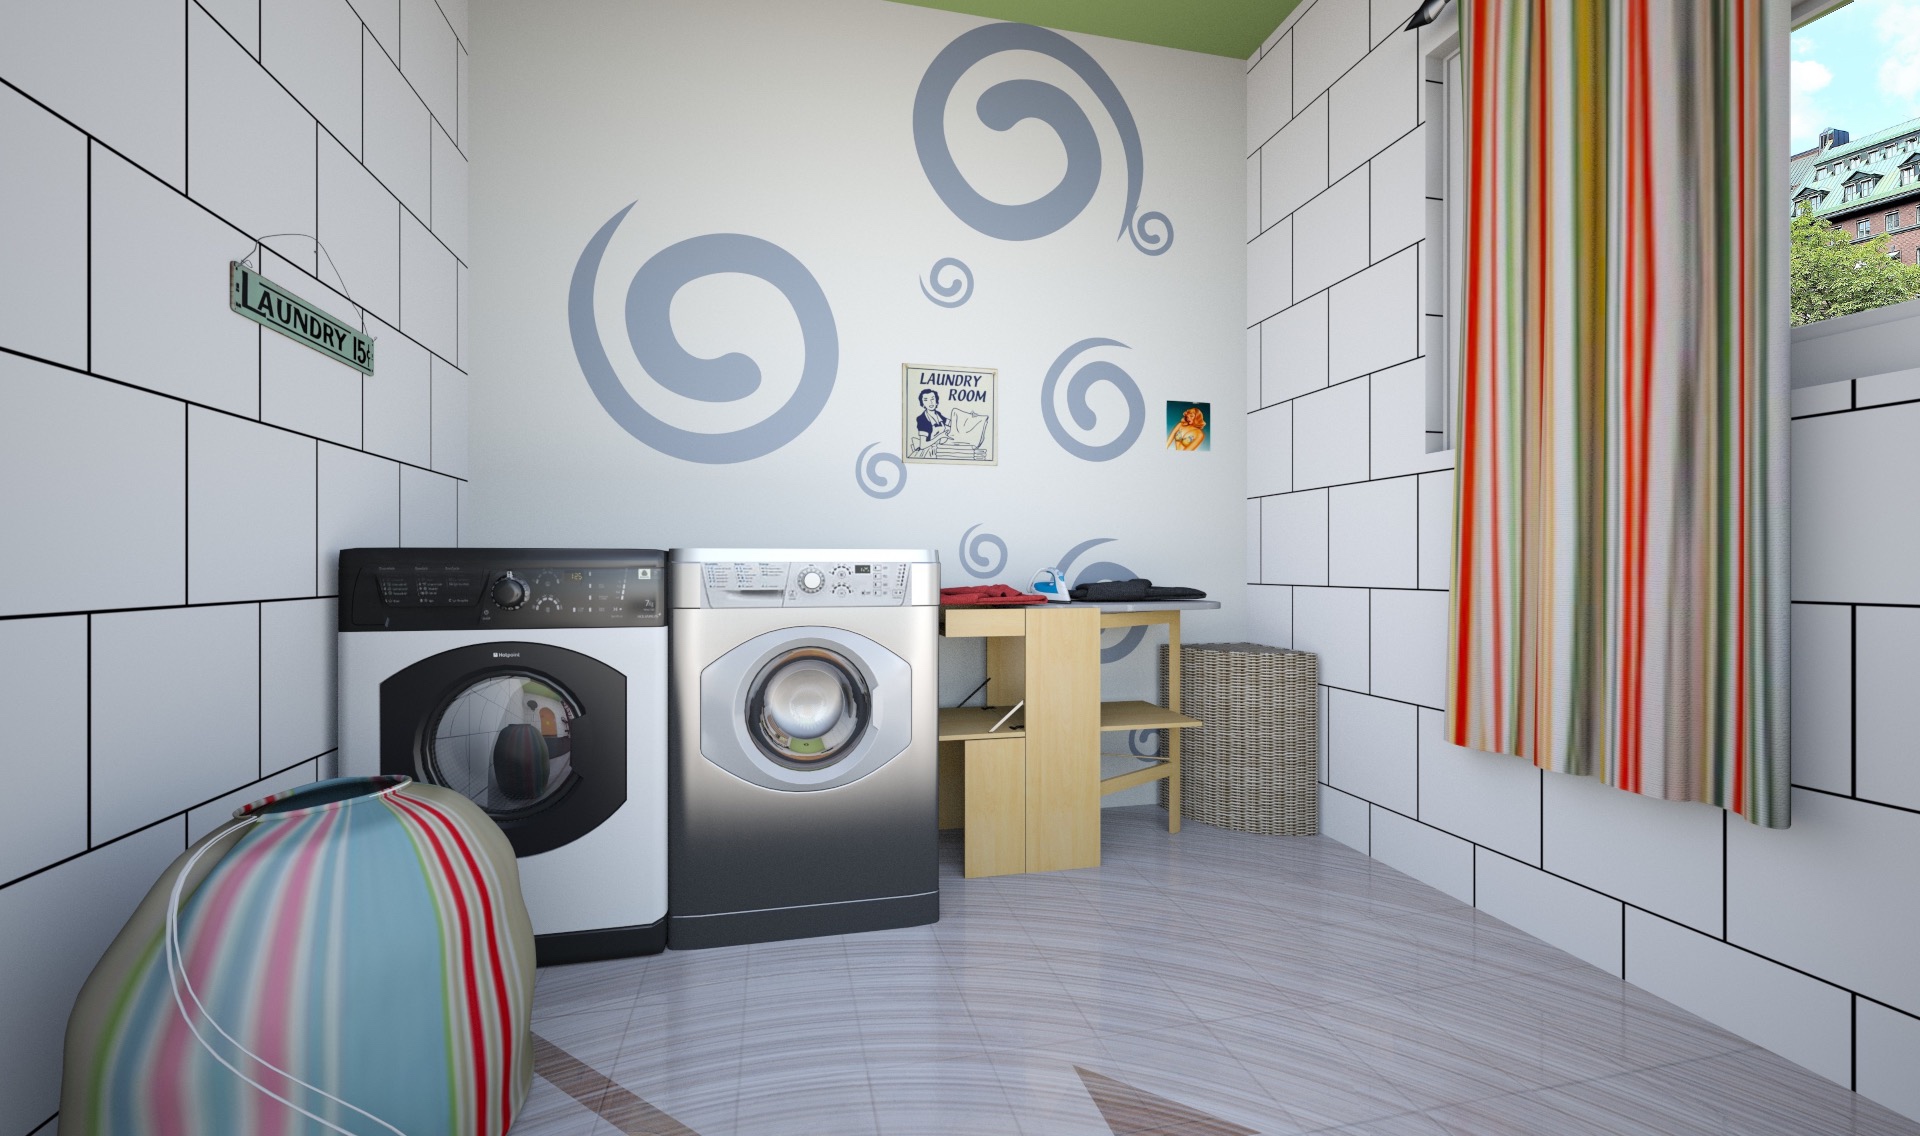 INT. LAUNDRY ROOM – DAY